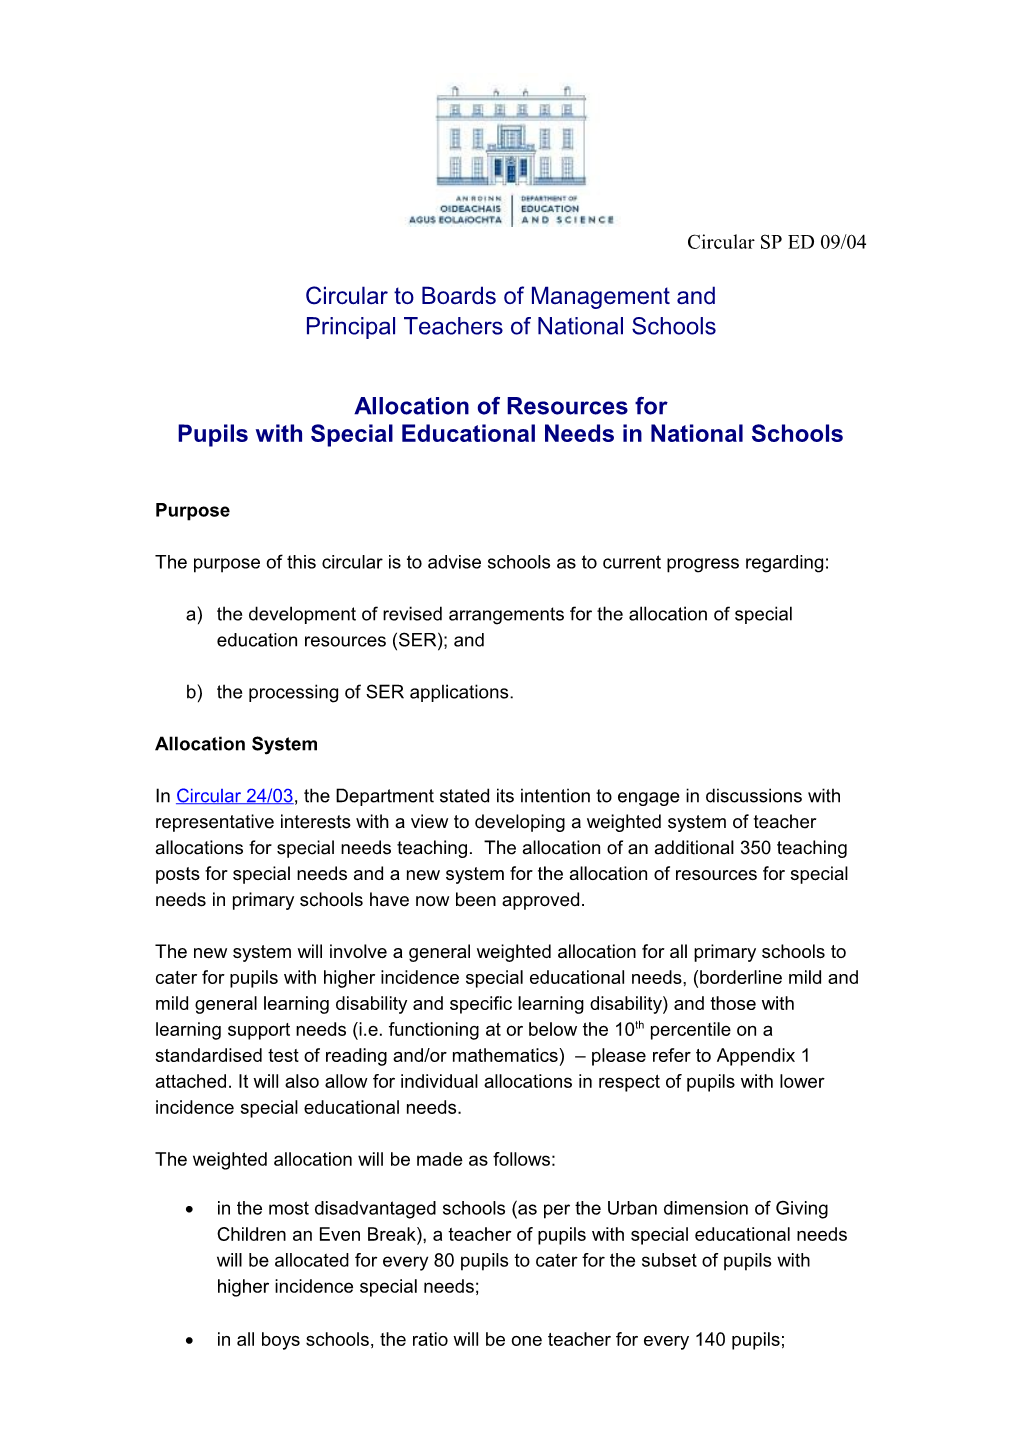 Circular SP ED 09/04 - Allocation of Resources for Pupils with Special Educational Needs